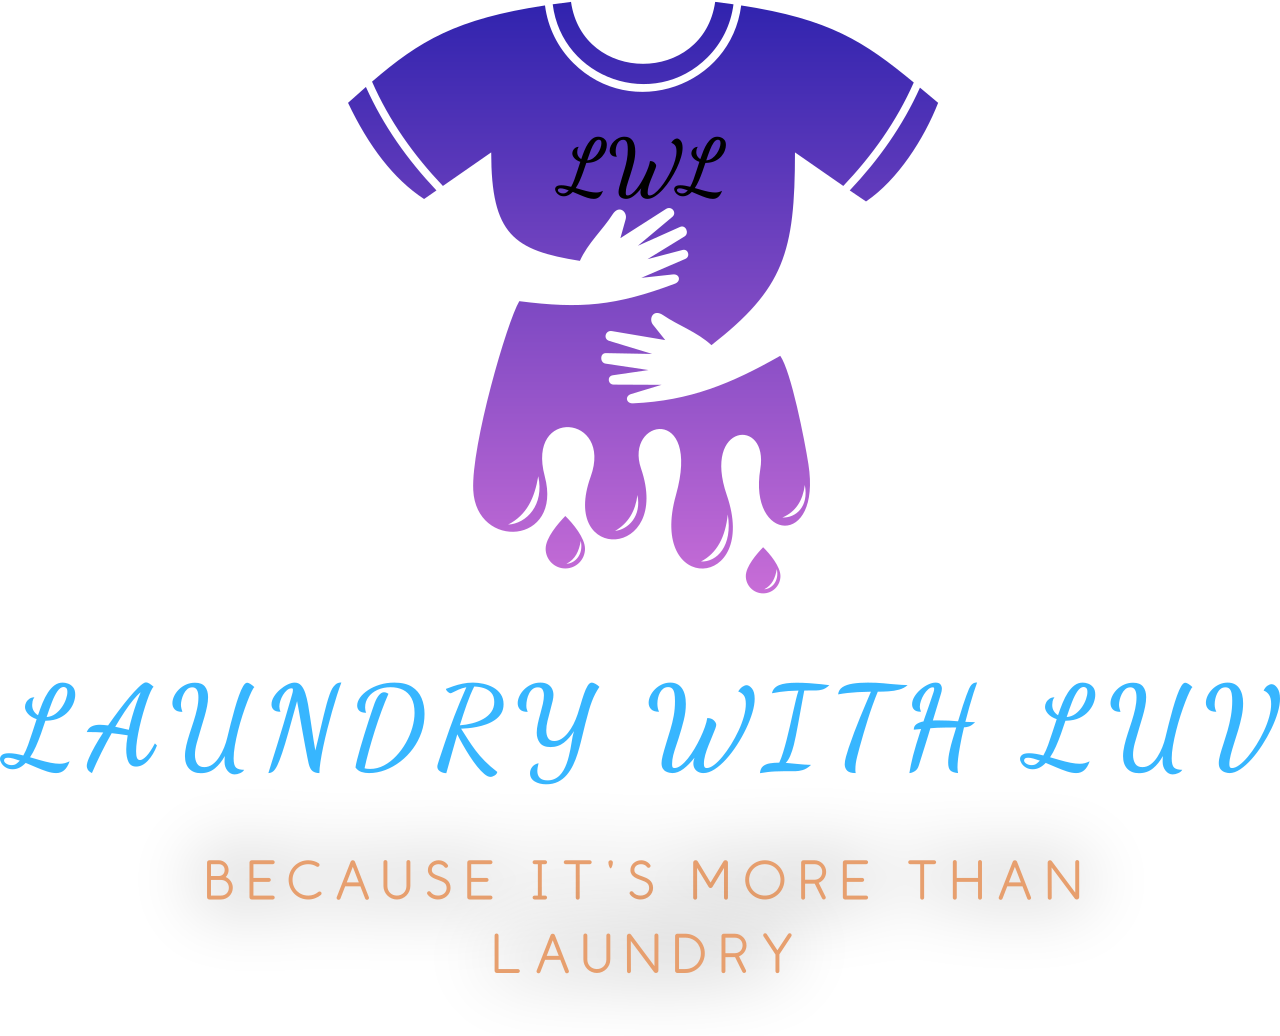 Laundry with Luv's logo